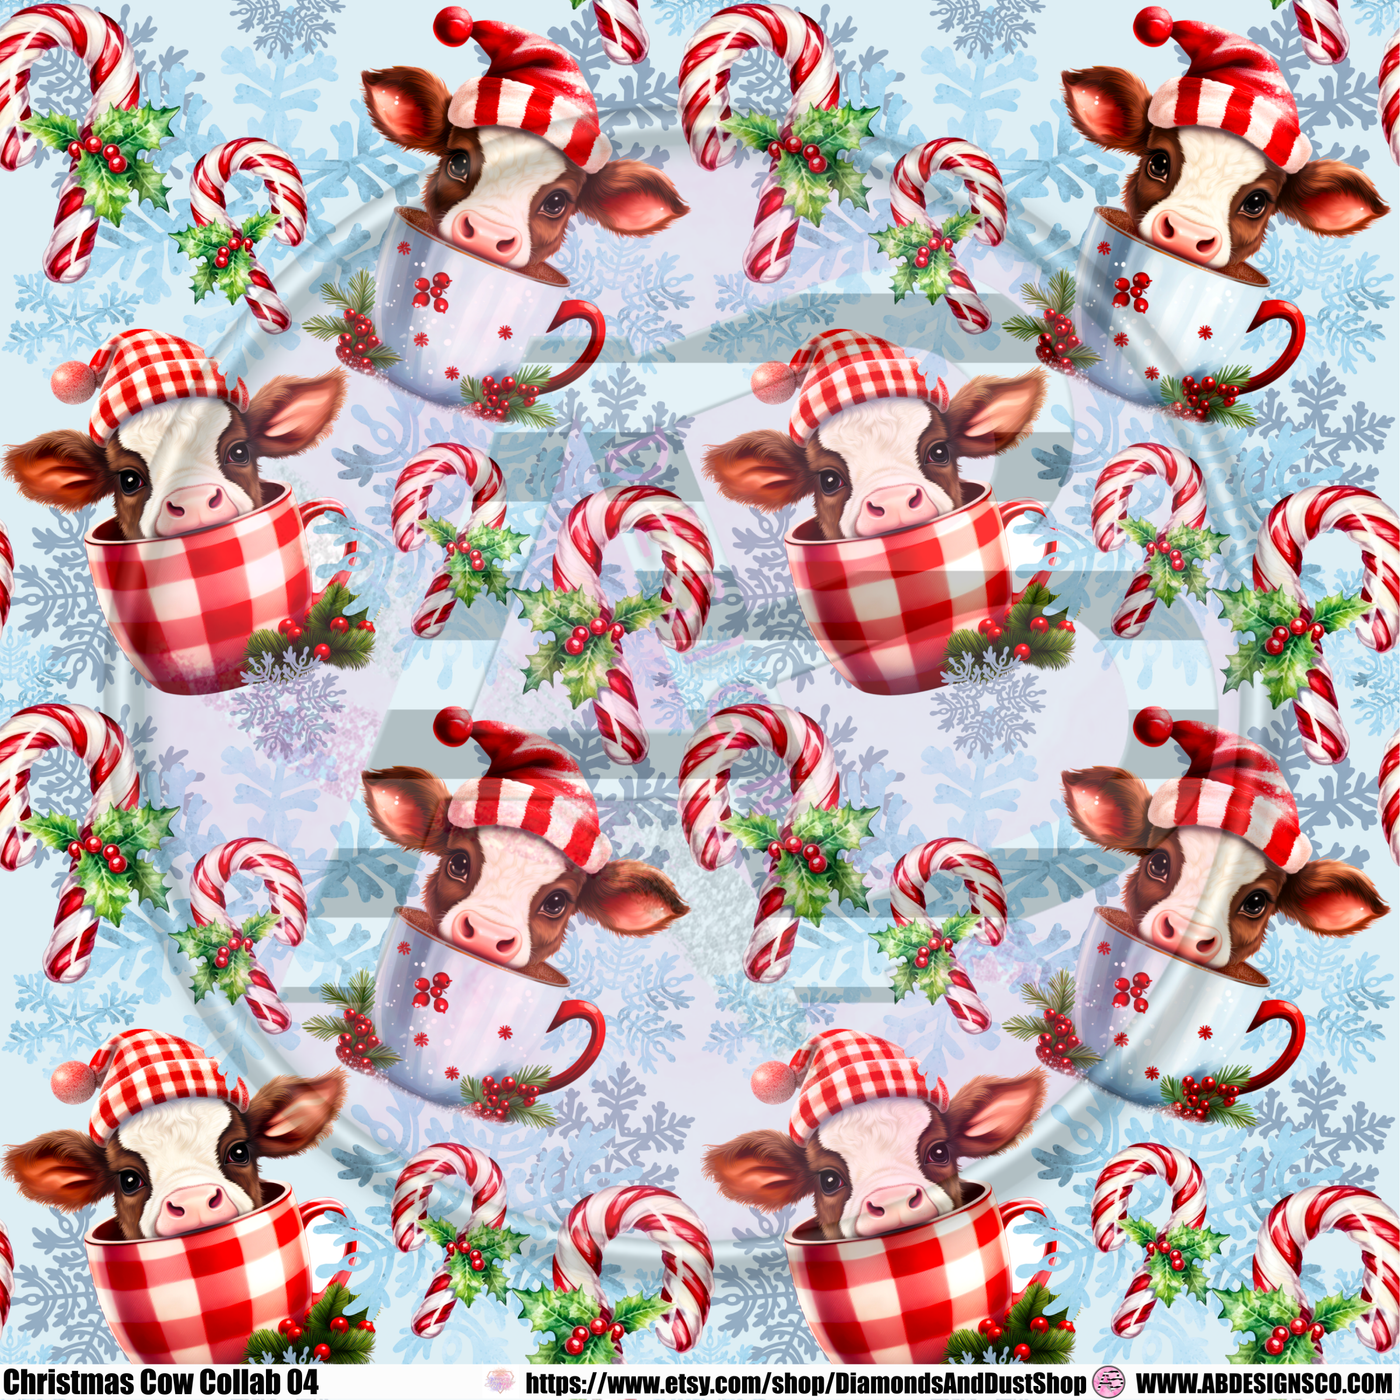 Adhesive Patterned Vinyl - Christmas Cow Collab 04